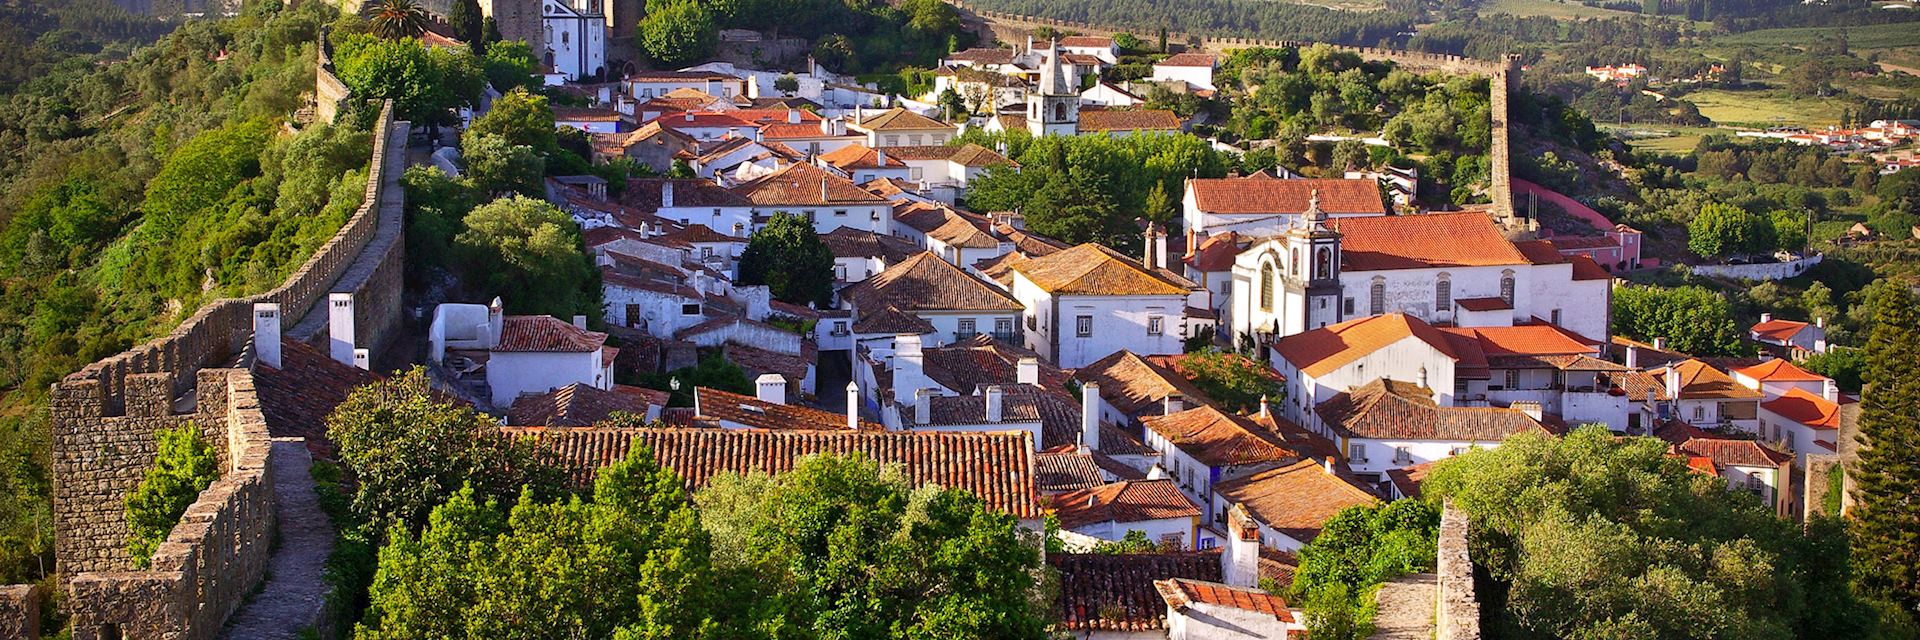 Aerial view of the village of Obidos in Portugal